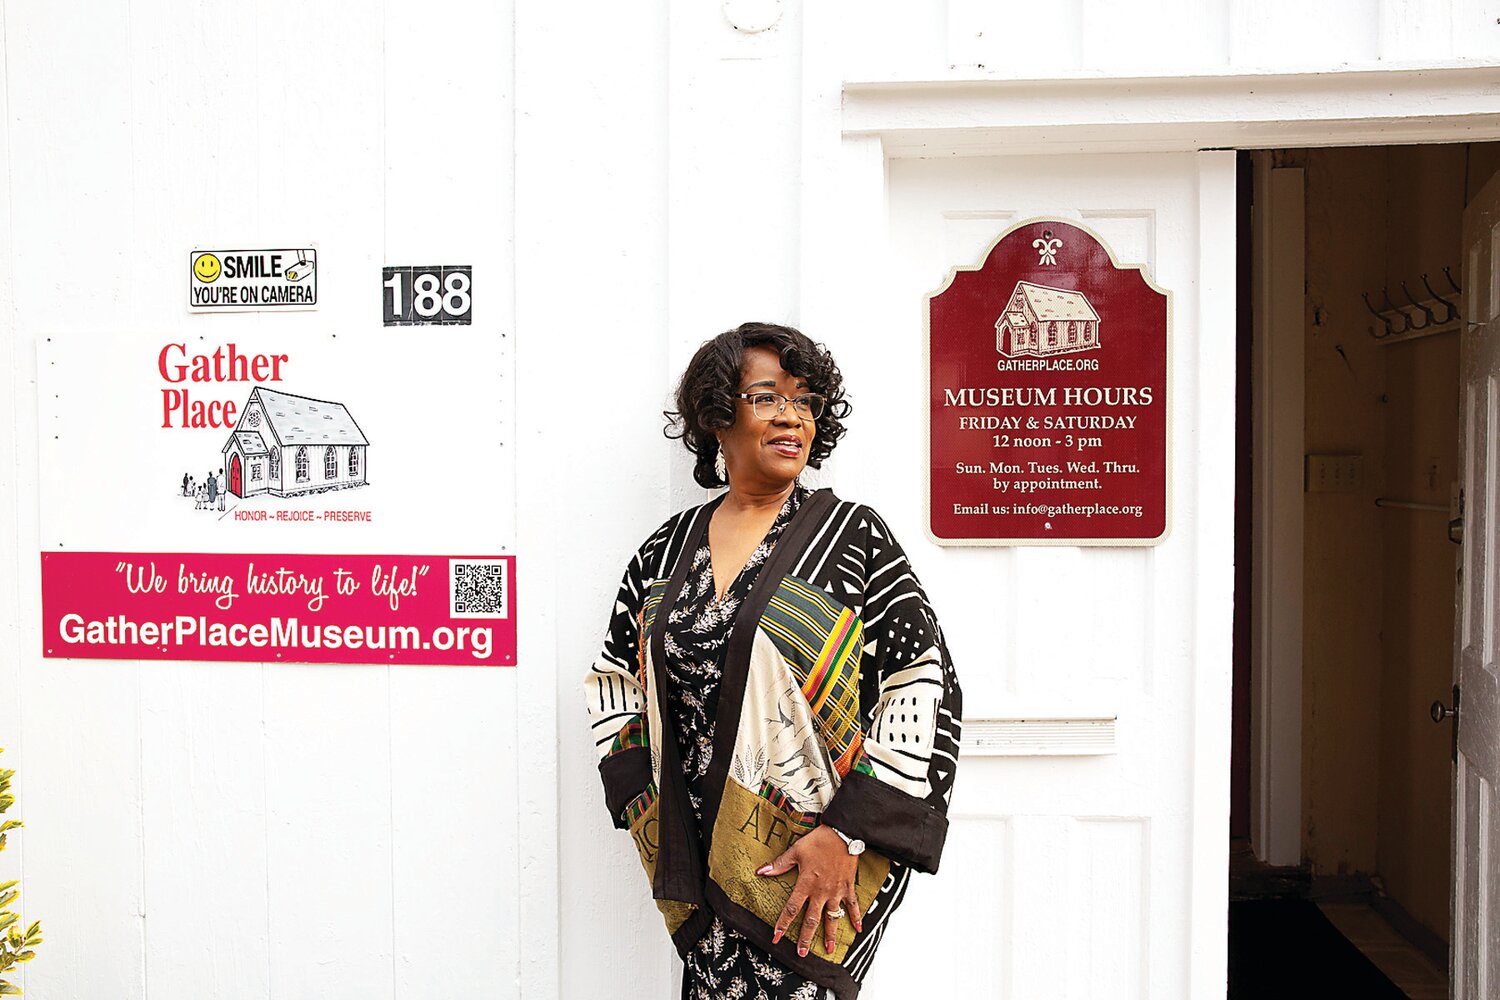 Shirley Lee Corsey, executive director and legal conservator of Gather Place Museum, stands just outside the main entrance of the site.